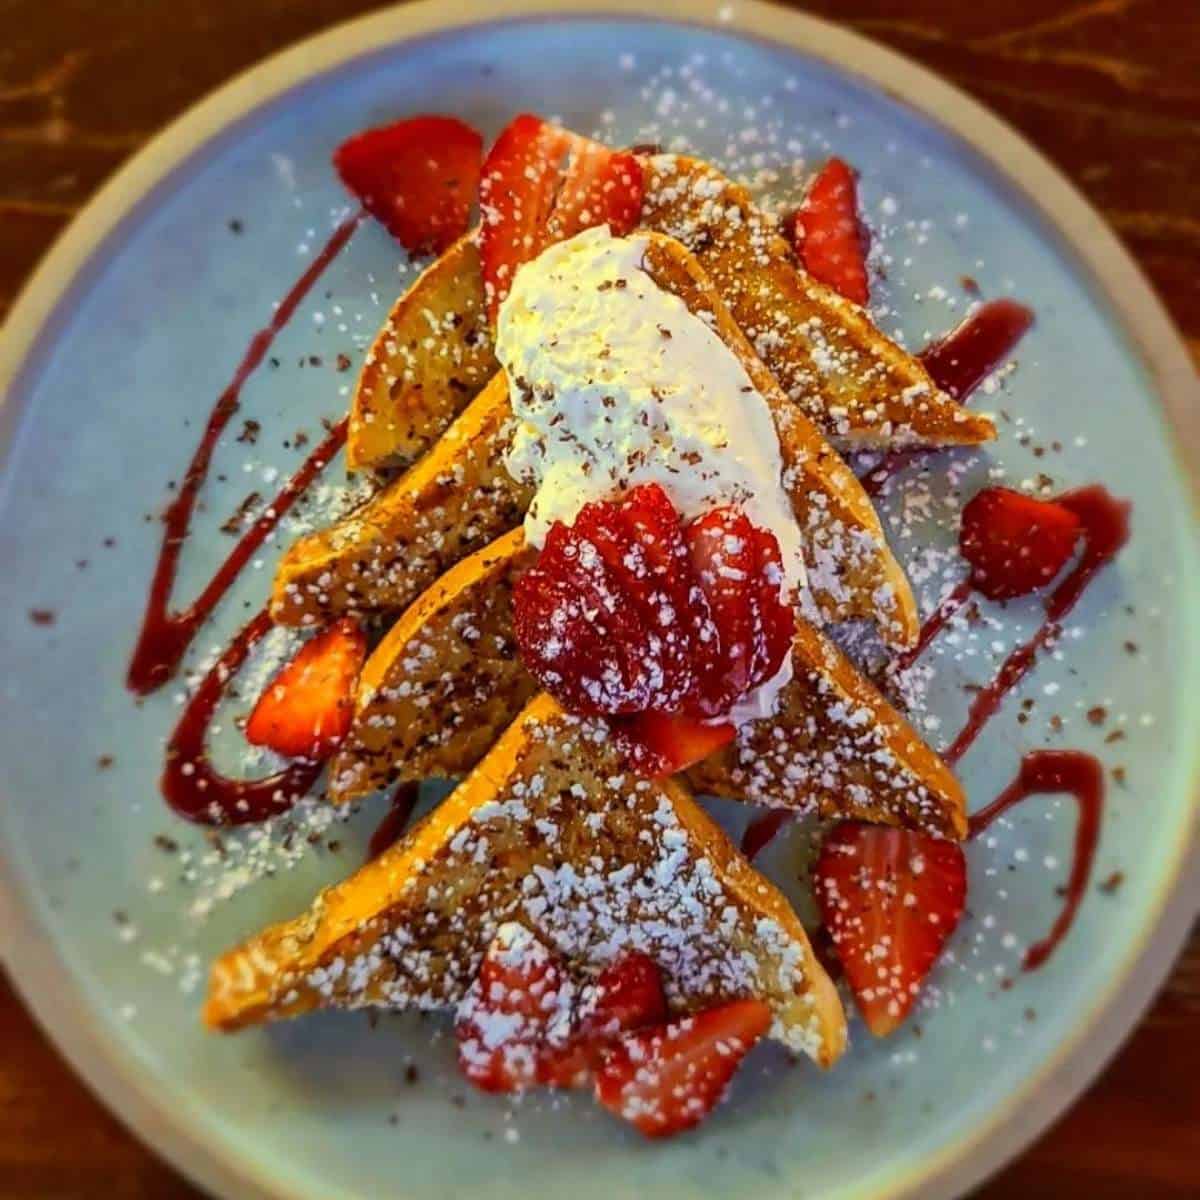 Strawberry temptation french toast from Diner Deluxe in Calgary. 